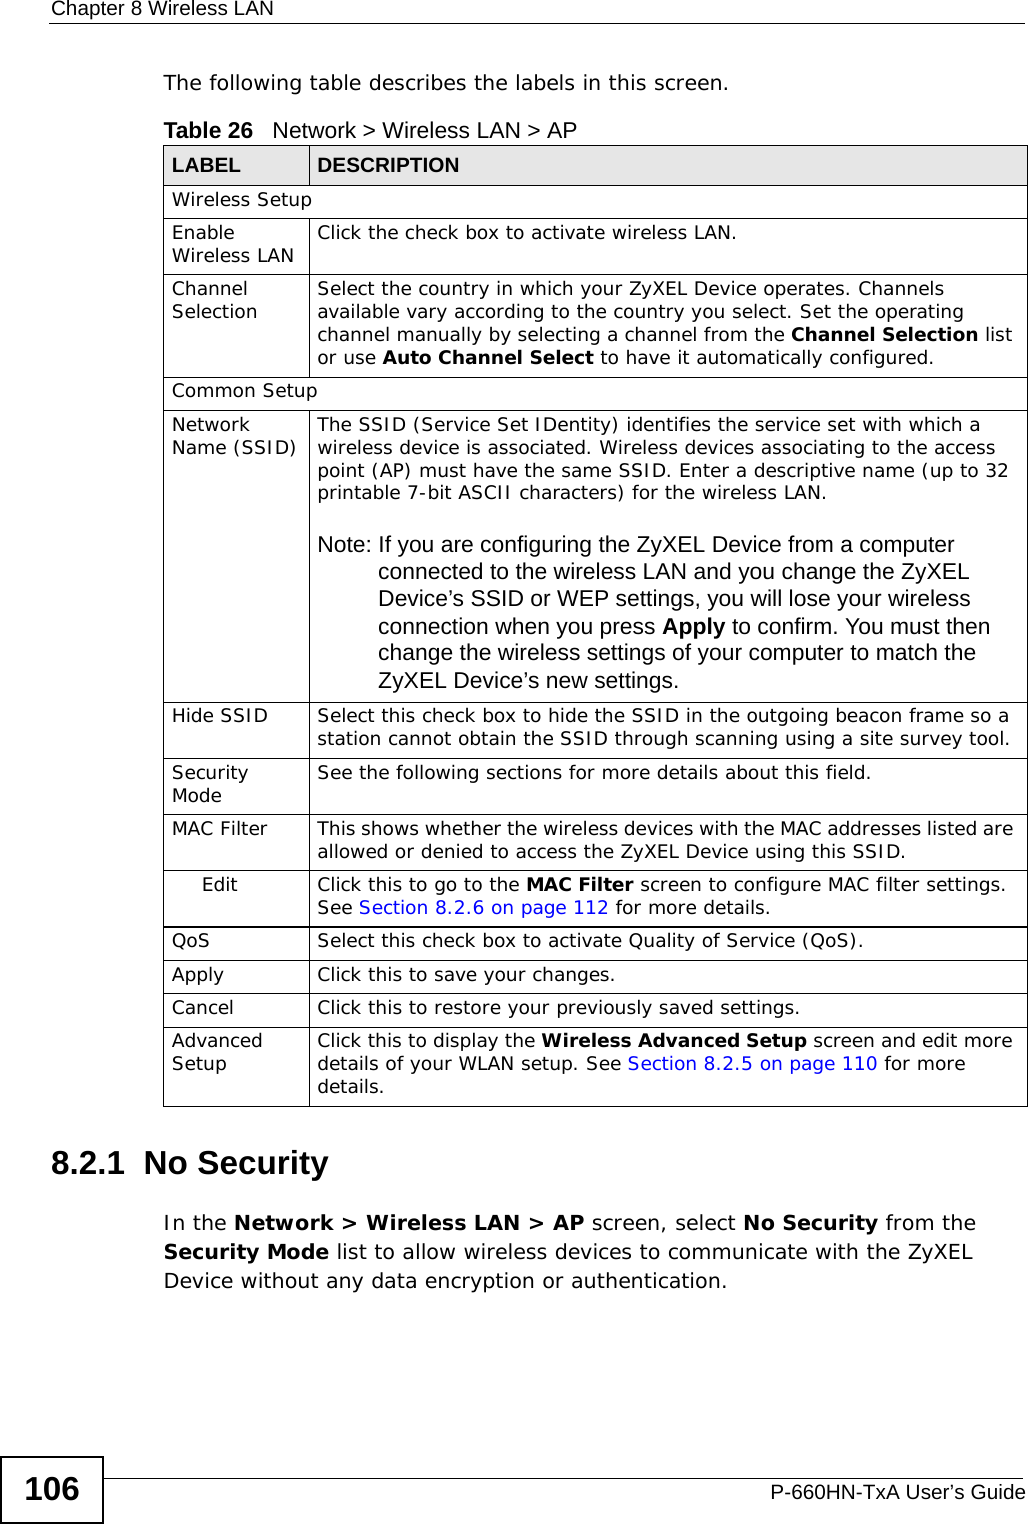 Chapter 8 Wireless LANP-660HN-TxA User’s Guide106The following table describes the labels in this screen.8.2.1  No SecurityIn the Network &gt; Wireless LAN &gt; AP screen, select No Security from the Security Mode list to allow wireless devices to communicate with the ZyXEL Device without any data encryption or authentication.Table 26   Network &gt; Wireless LAN &gt; APLABEL DESCRIPTIONWireless SetupEnable Wireless LAN Click the check box to activate wireless LAN.Channel Selection Select the country in which your ZyXEL Device operates. Channels available vary according to the country you select. Set the operating channel manually by selecting a channel from the Channel Selection list or use Auto Channel Select to have it automatically configured.Common SetupNetwork Name (SSID) The SSID (Service Set IDentity) identifies the service set with which a wireless device is associated. Wireless devices associating to the access point (AP) must have the same SSID. Enter a descriptive name (up to 32 printable 7-bit ASCII characters) for the wireless LAN. Note: If you are configuring the ZyXEL Device from a computer connected to the wireless LAN and you change the ZyXEL Device’s SSID or WEP settings, you will lose your wireless connection when you press Apply to confirm. You must then change the wireless settings of your computer to match the ZyXEL Device’s new settings.Hide SSID Select this check box to hide the SSID in the outgoing beacon frame so a station cannot obtain the SSID through scanning using a site survey tool.Security Mode See the following sections for more details about this field.MAC Filter  This shows whether the wireless devices with the MAC addresses listed are allowed or denied to access the ZyXEL Device using this SSID.Edit Click this to go to the MAC Filter screen to configure MAC filter settings. See Section 8.2.6 on page 112 for more details.QoS Select this check box to activate Quality of Service (QoS). Apply Click this to save your changes.Cancel Click this to restore your previously saved settings.Advanced Setup Click this to display the Wireless Advanced Setup screen and edit more details of your WLAN setup. See Section 8.2.5 on page 110 for more details.